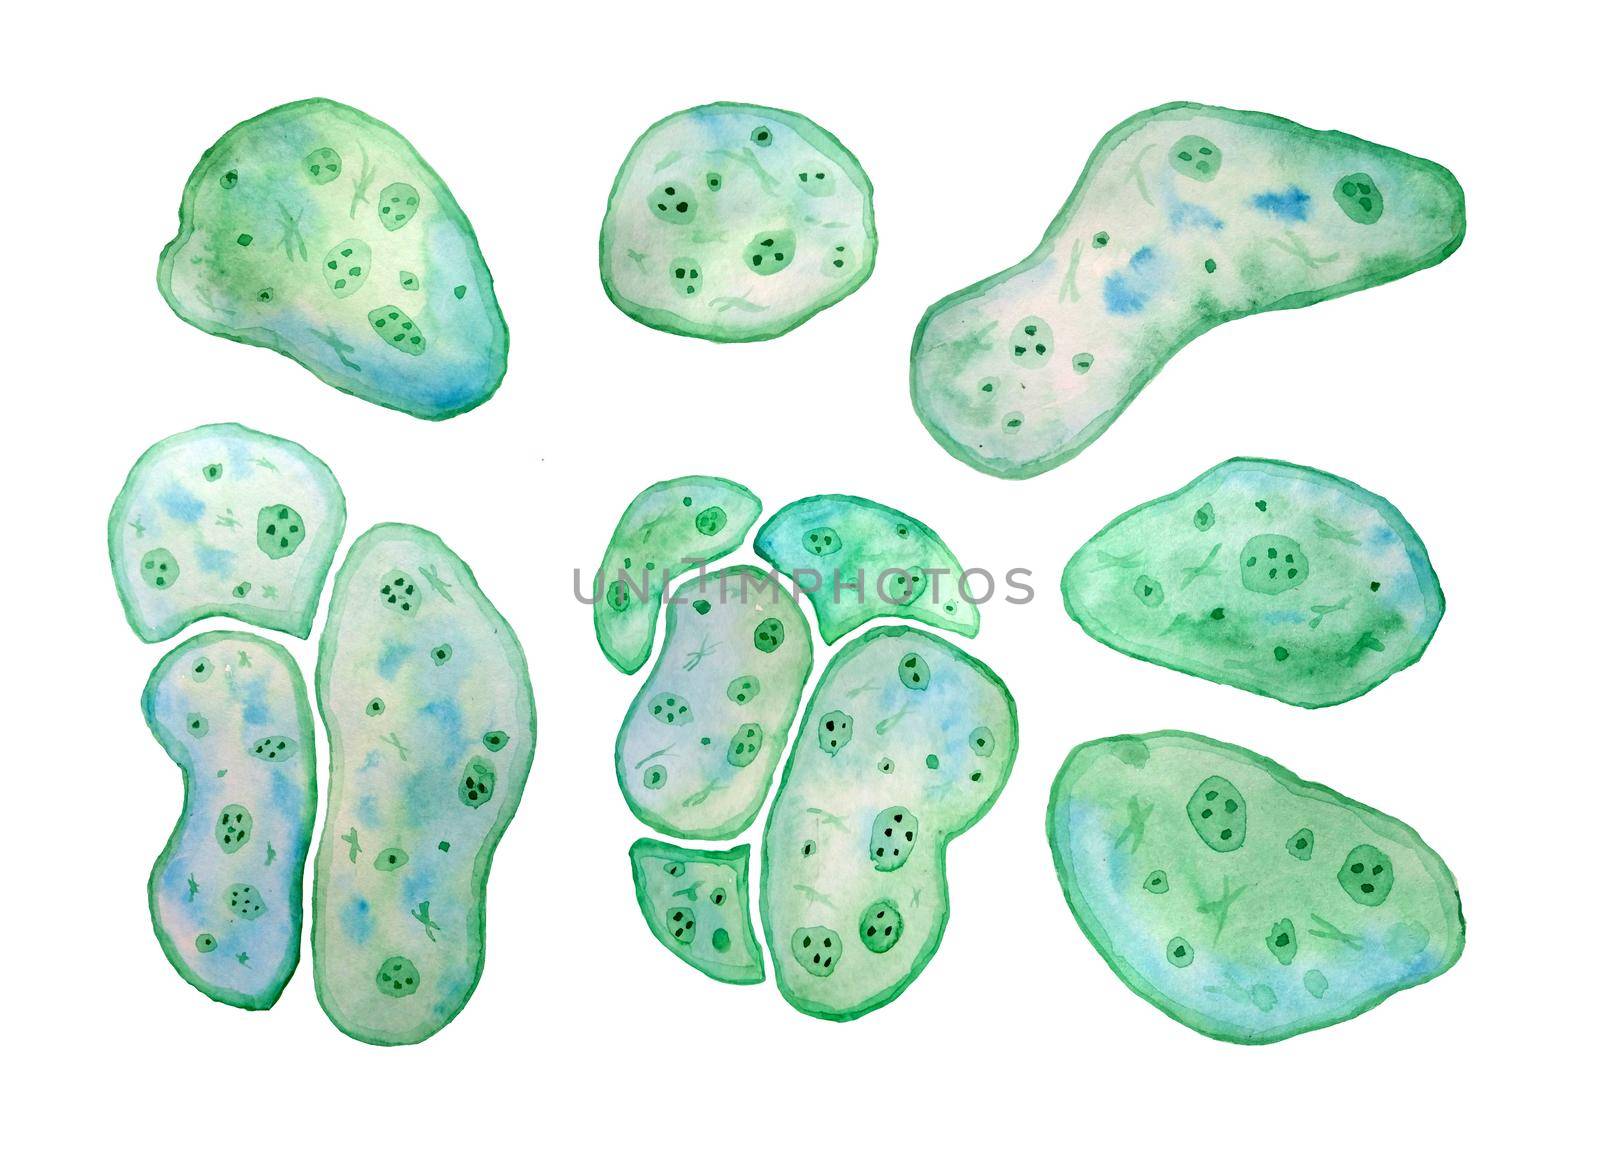 Unicellular green blue algae chlorella spirulina with large cells single-cells with lipid droplets. Watercolor illustration of macro zoom microorganism bacteria for cosmetics biological biotech design. by Lagmar